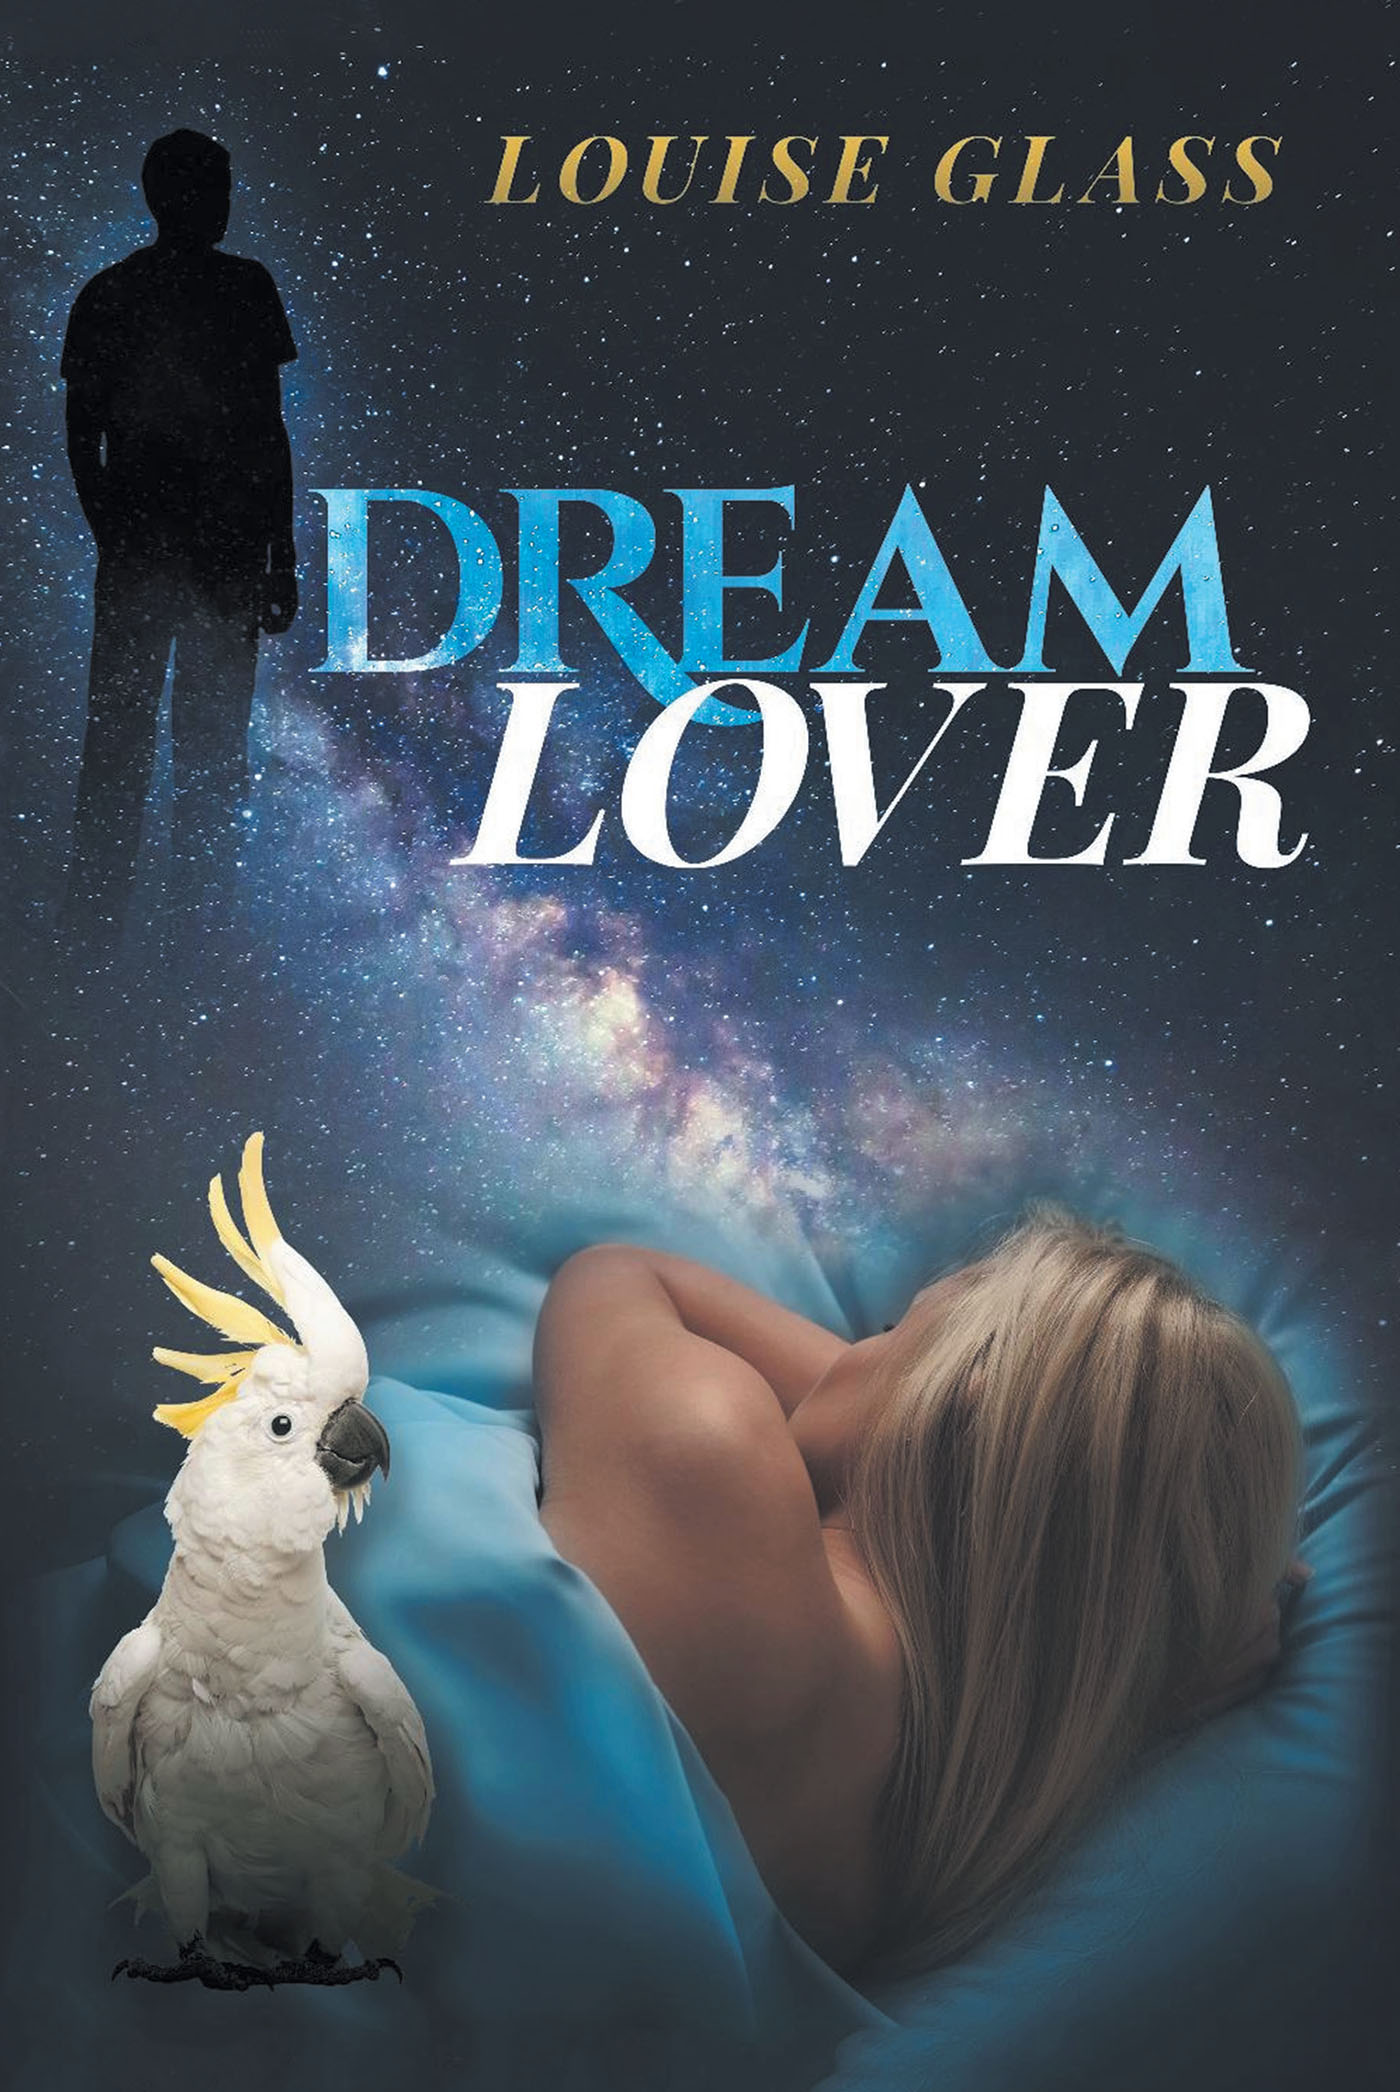 Three Best Friends Are Trapped as Their World Collides with the Supernatural in "Dream Lover," the Electrifying New Novel by Louise Glass